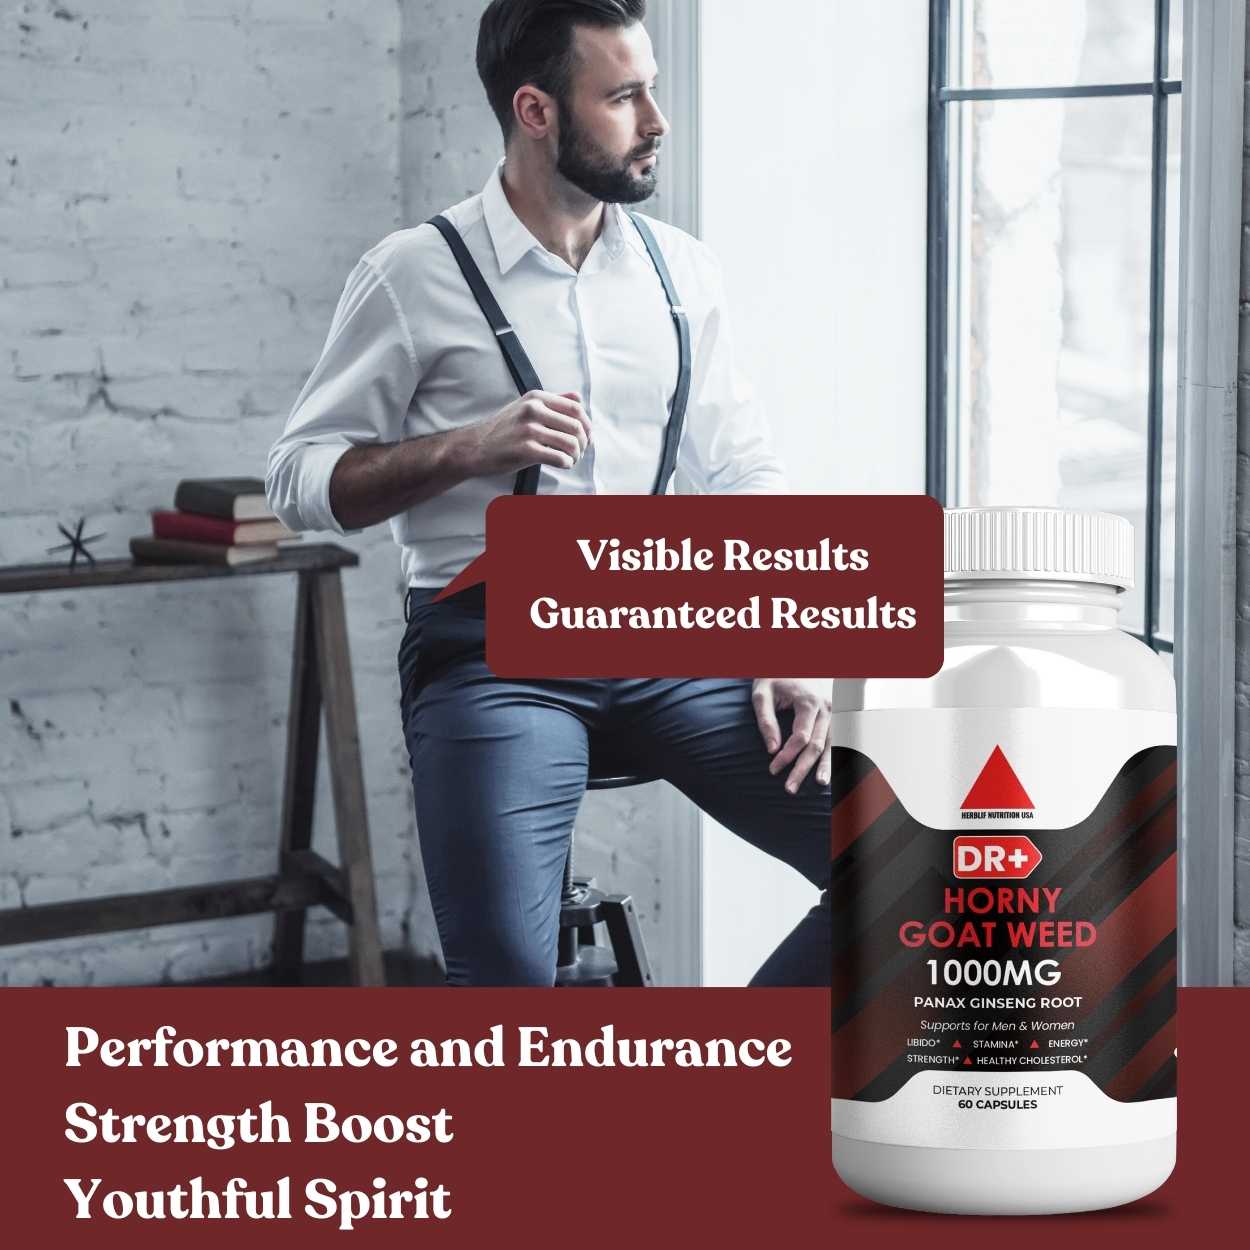 Male Performance Boost - Natural Testosterone Booster with Horny Goat Weed Extract | 2-Pack - Herblif Nutrition USA